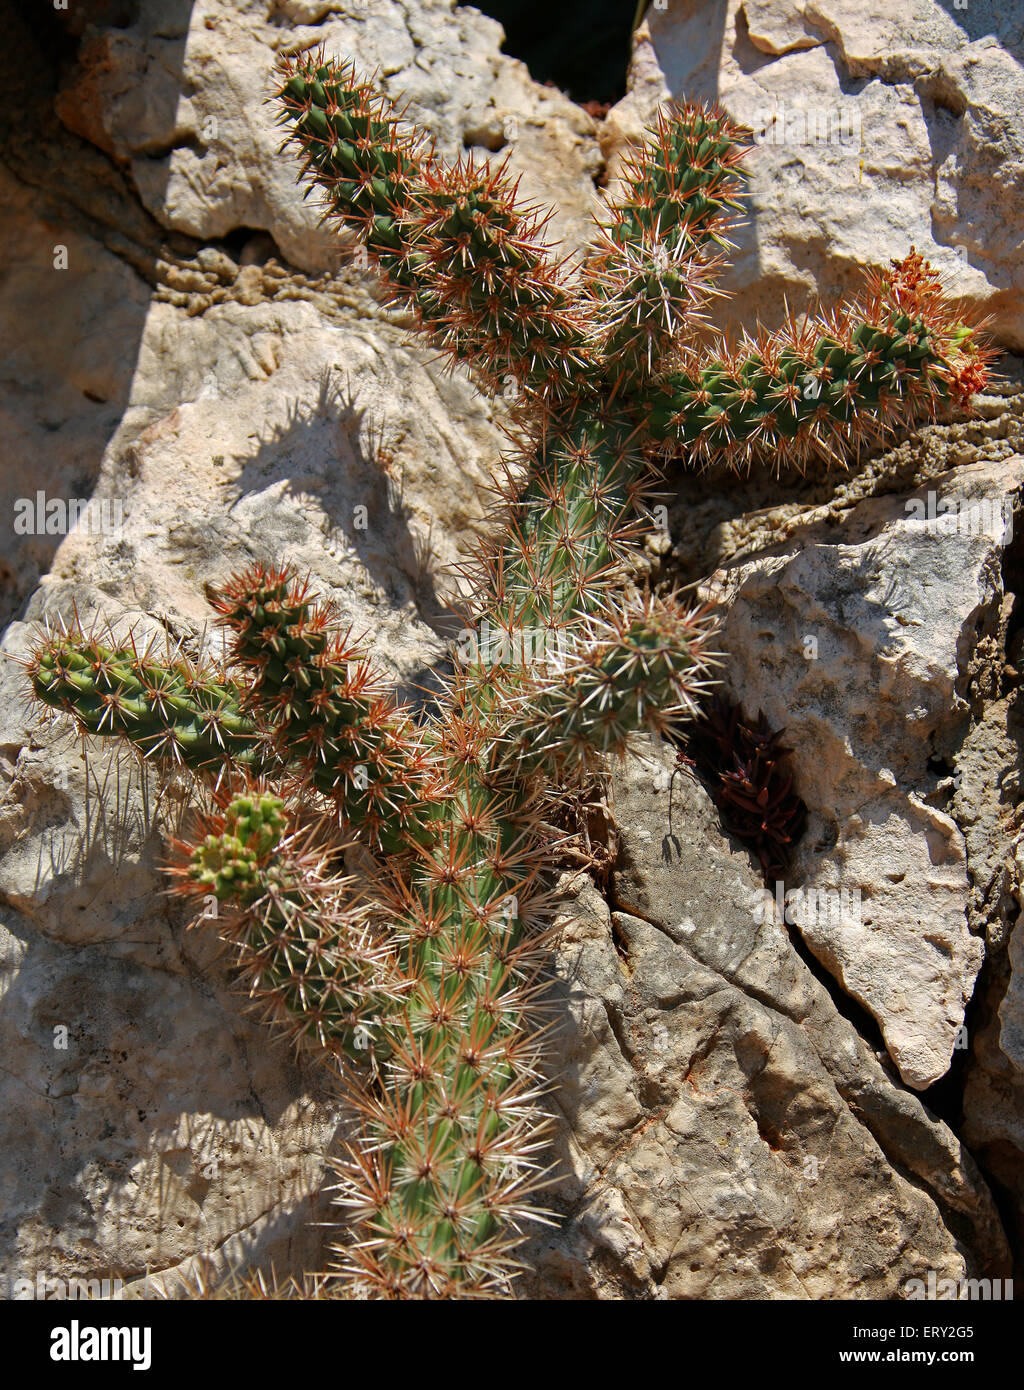 Cactus, Cylindropuntia spinosior, Cactaceae. Southern USA and Mexico. Stock Photo